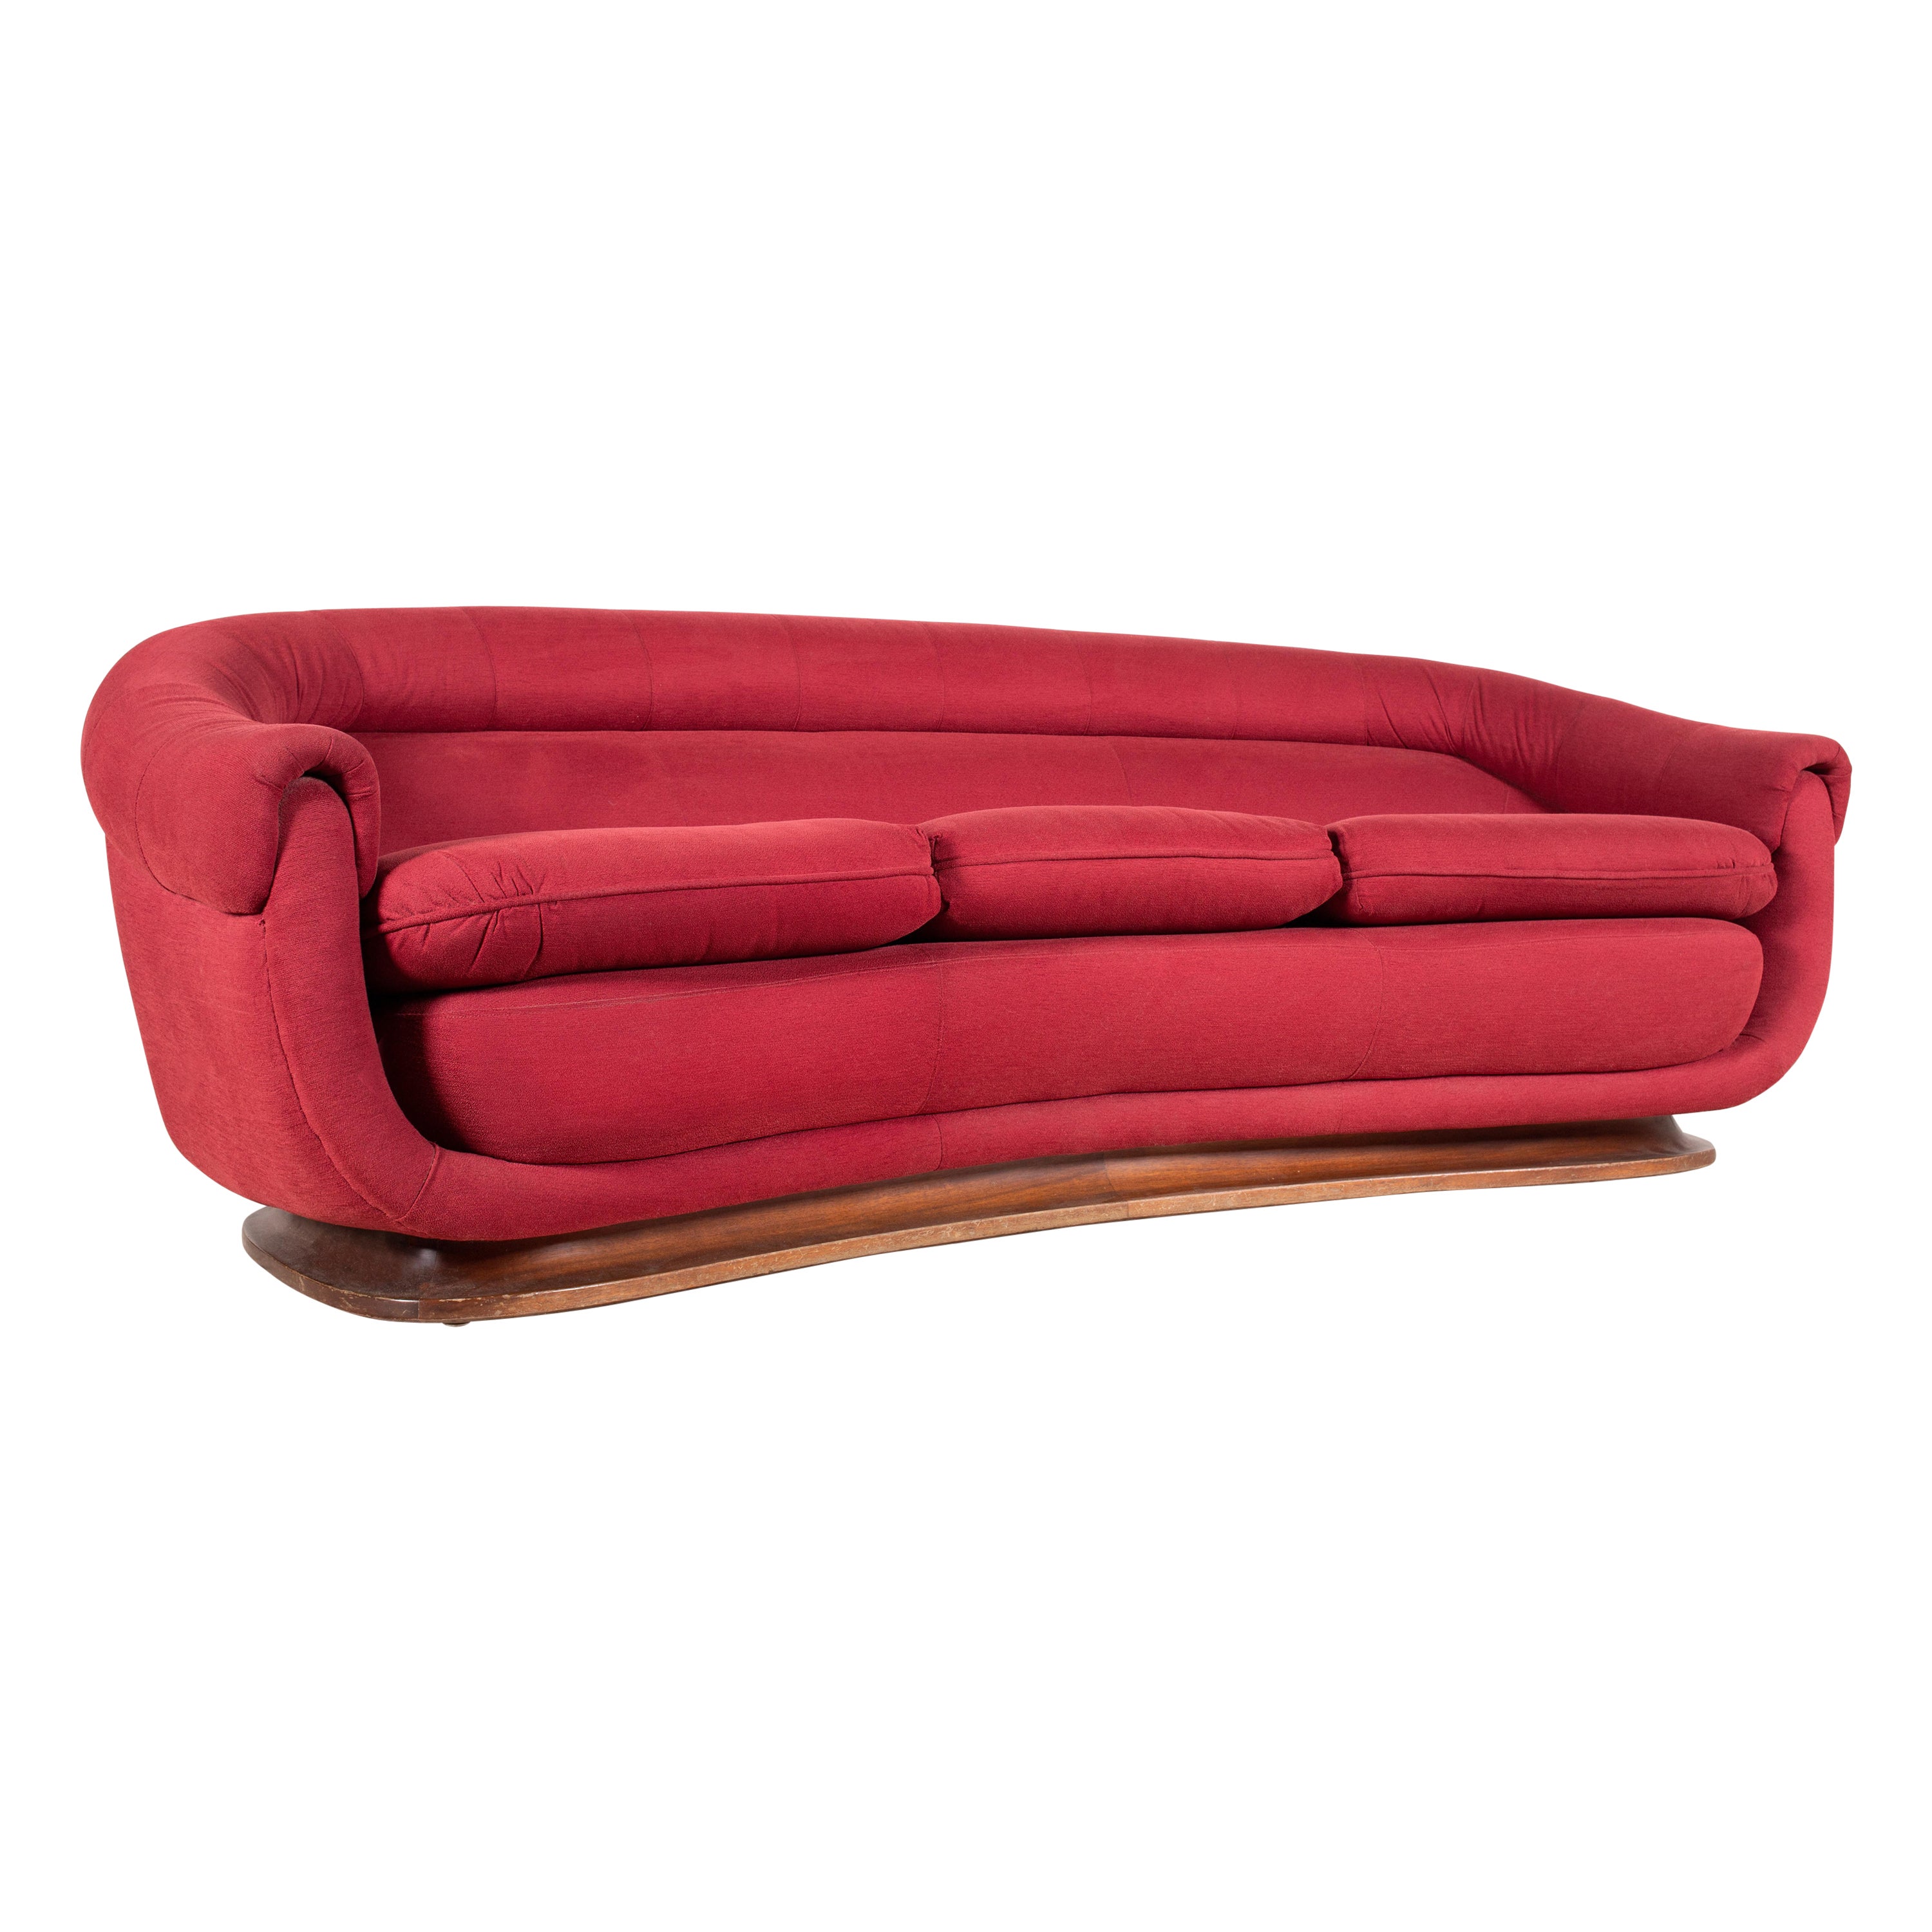 1950s Modern Italian Curved / Crescent 3-Seat Sofa in Red Fabric & Walnut For Sale